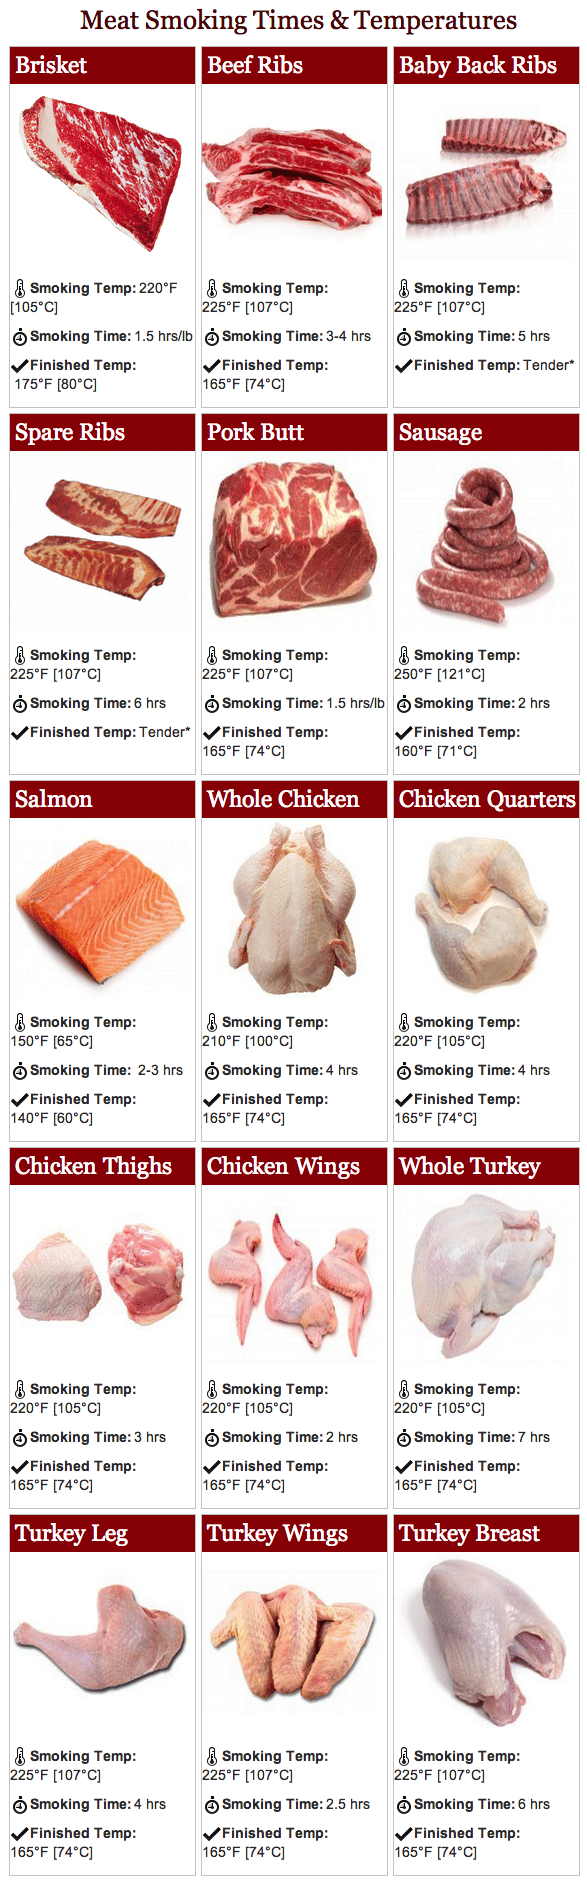 Smoking Times and Temperatures Chart for Beef, Pork & Poultry